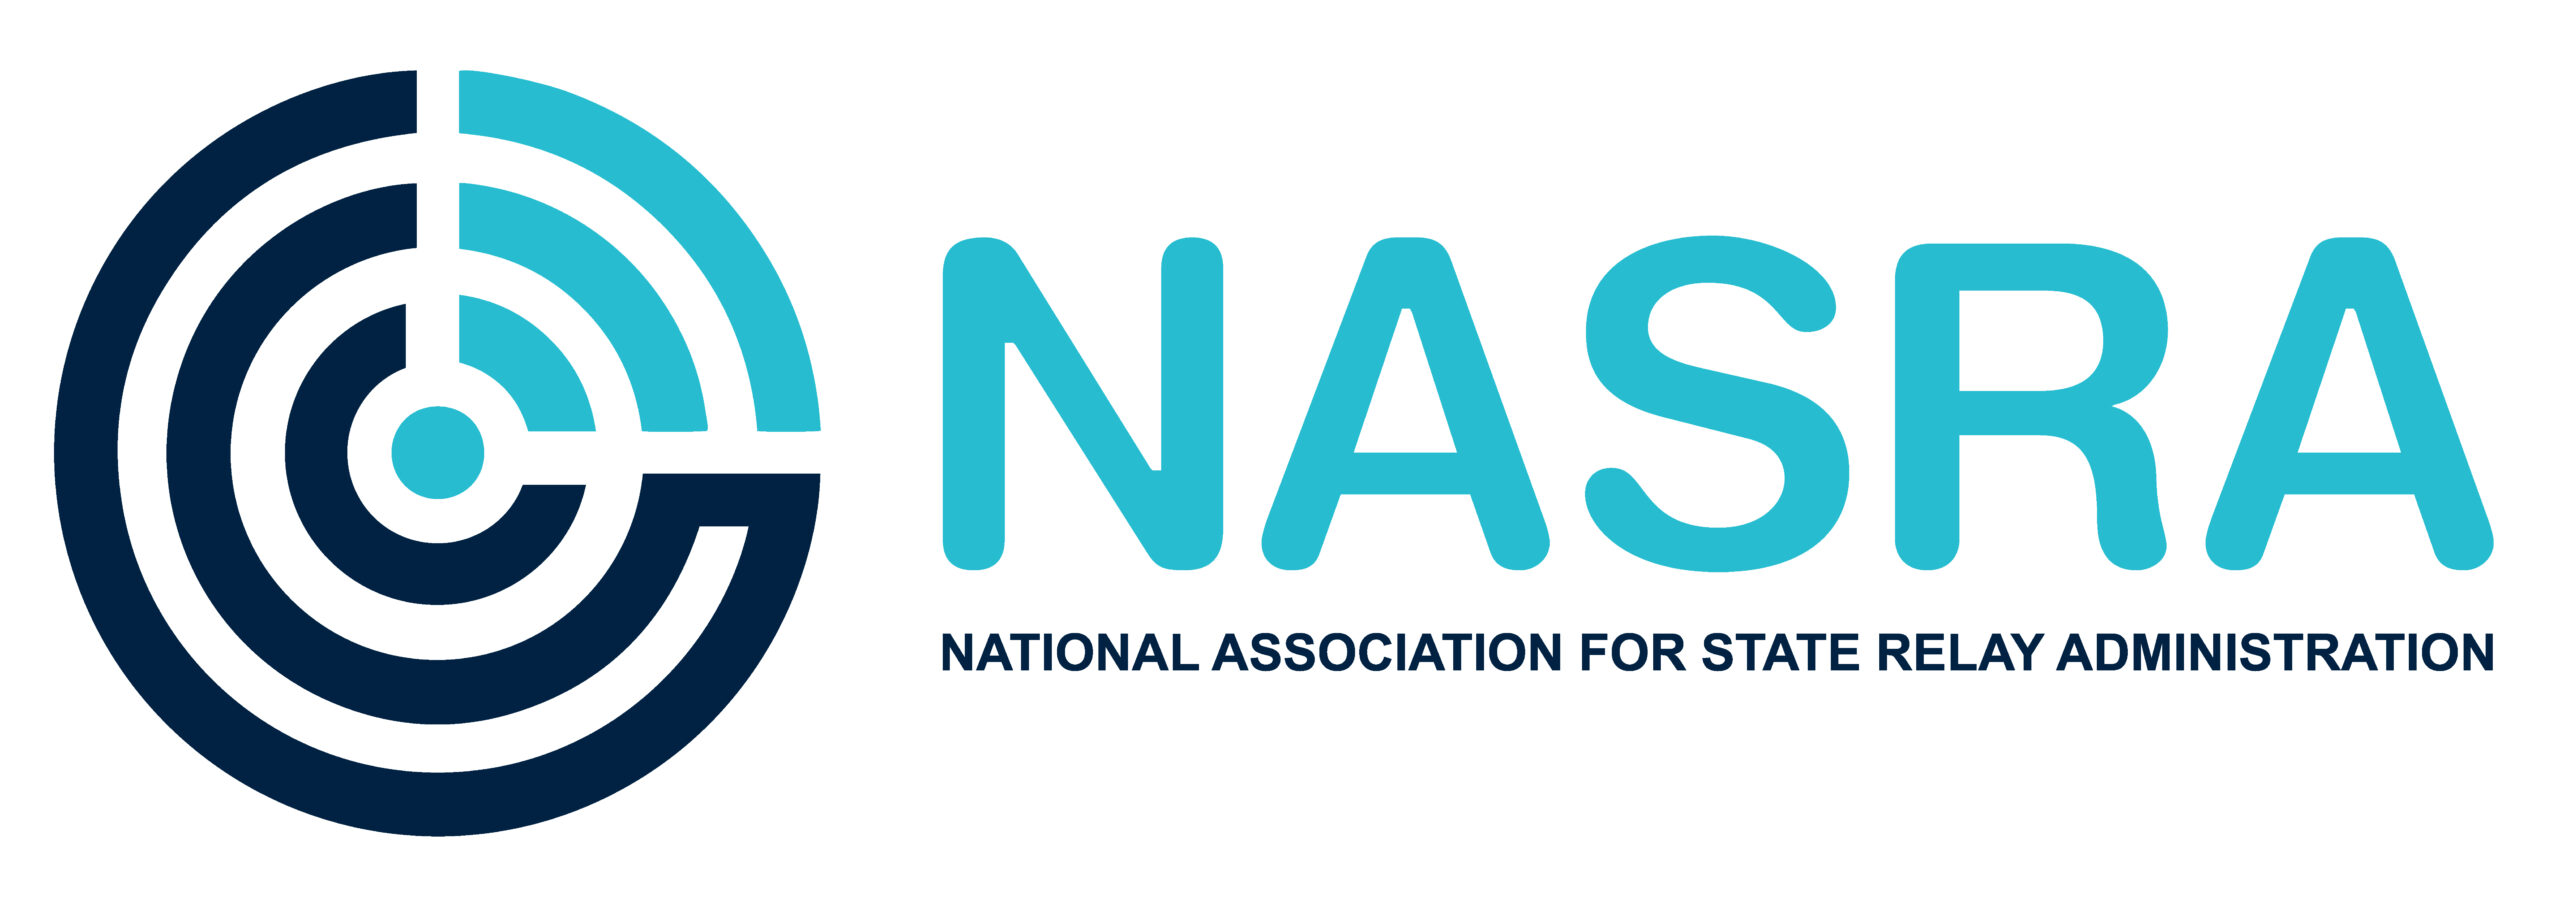 National Association for State Relay Administration